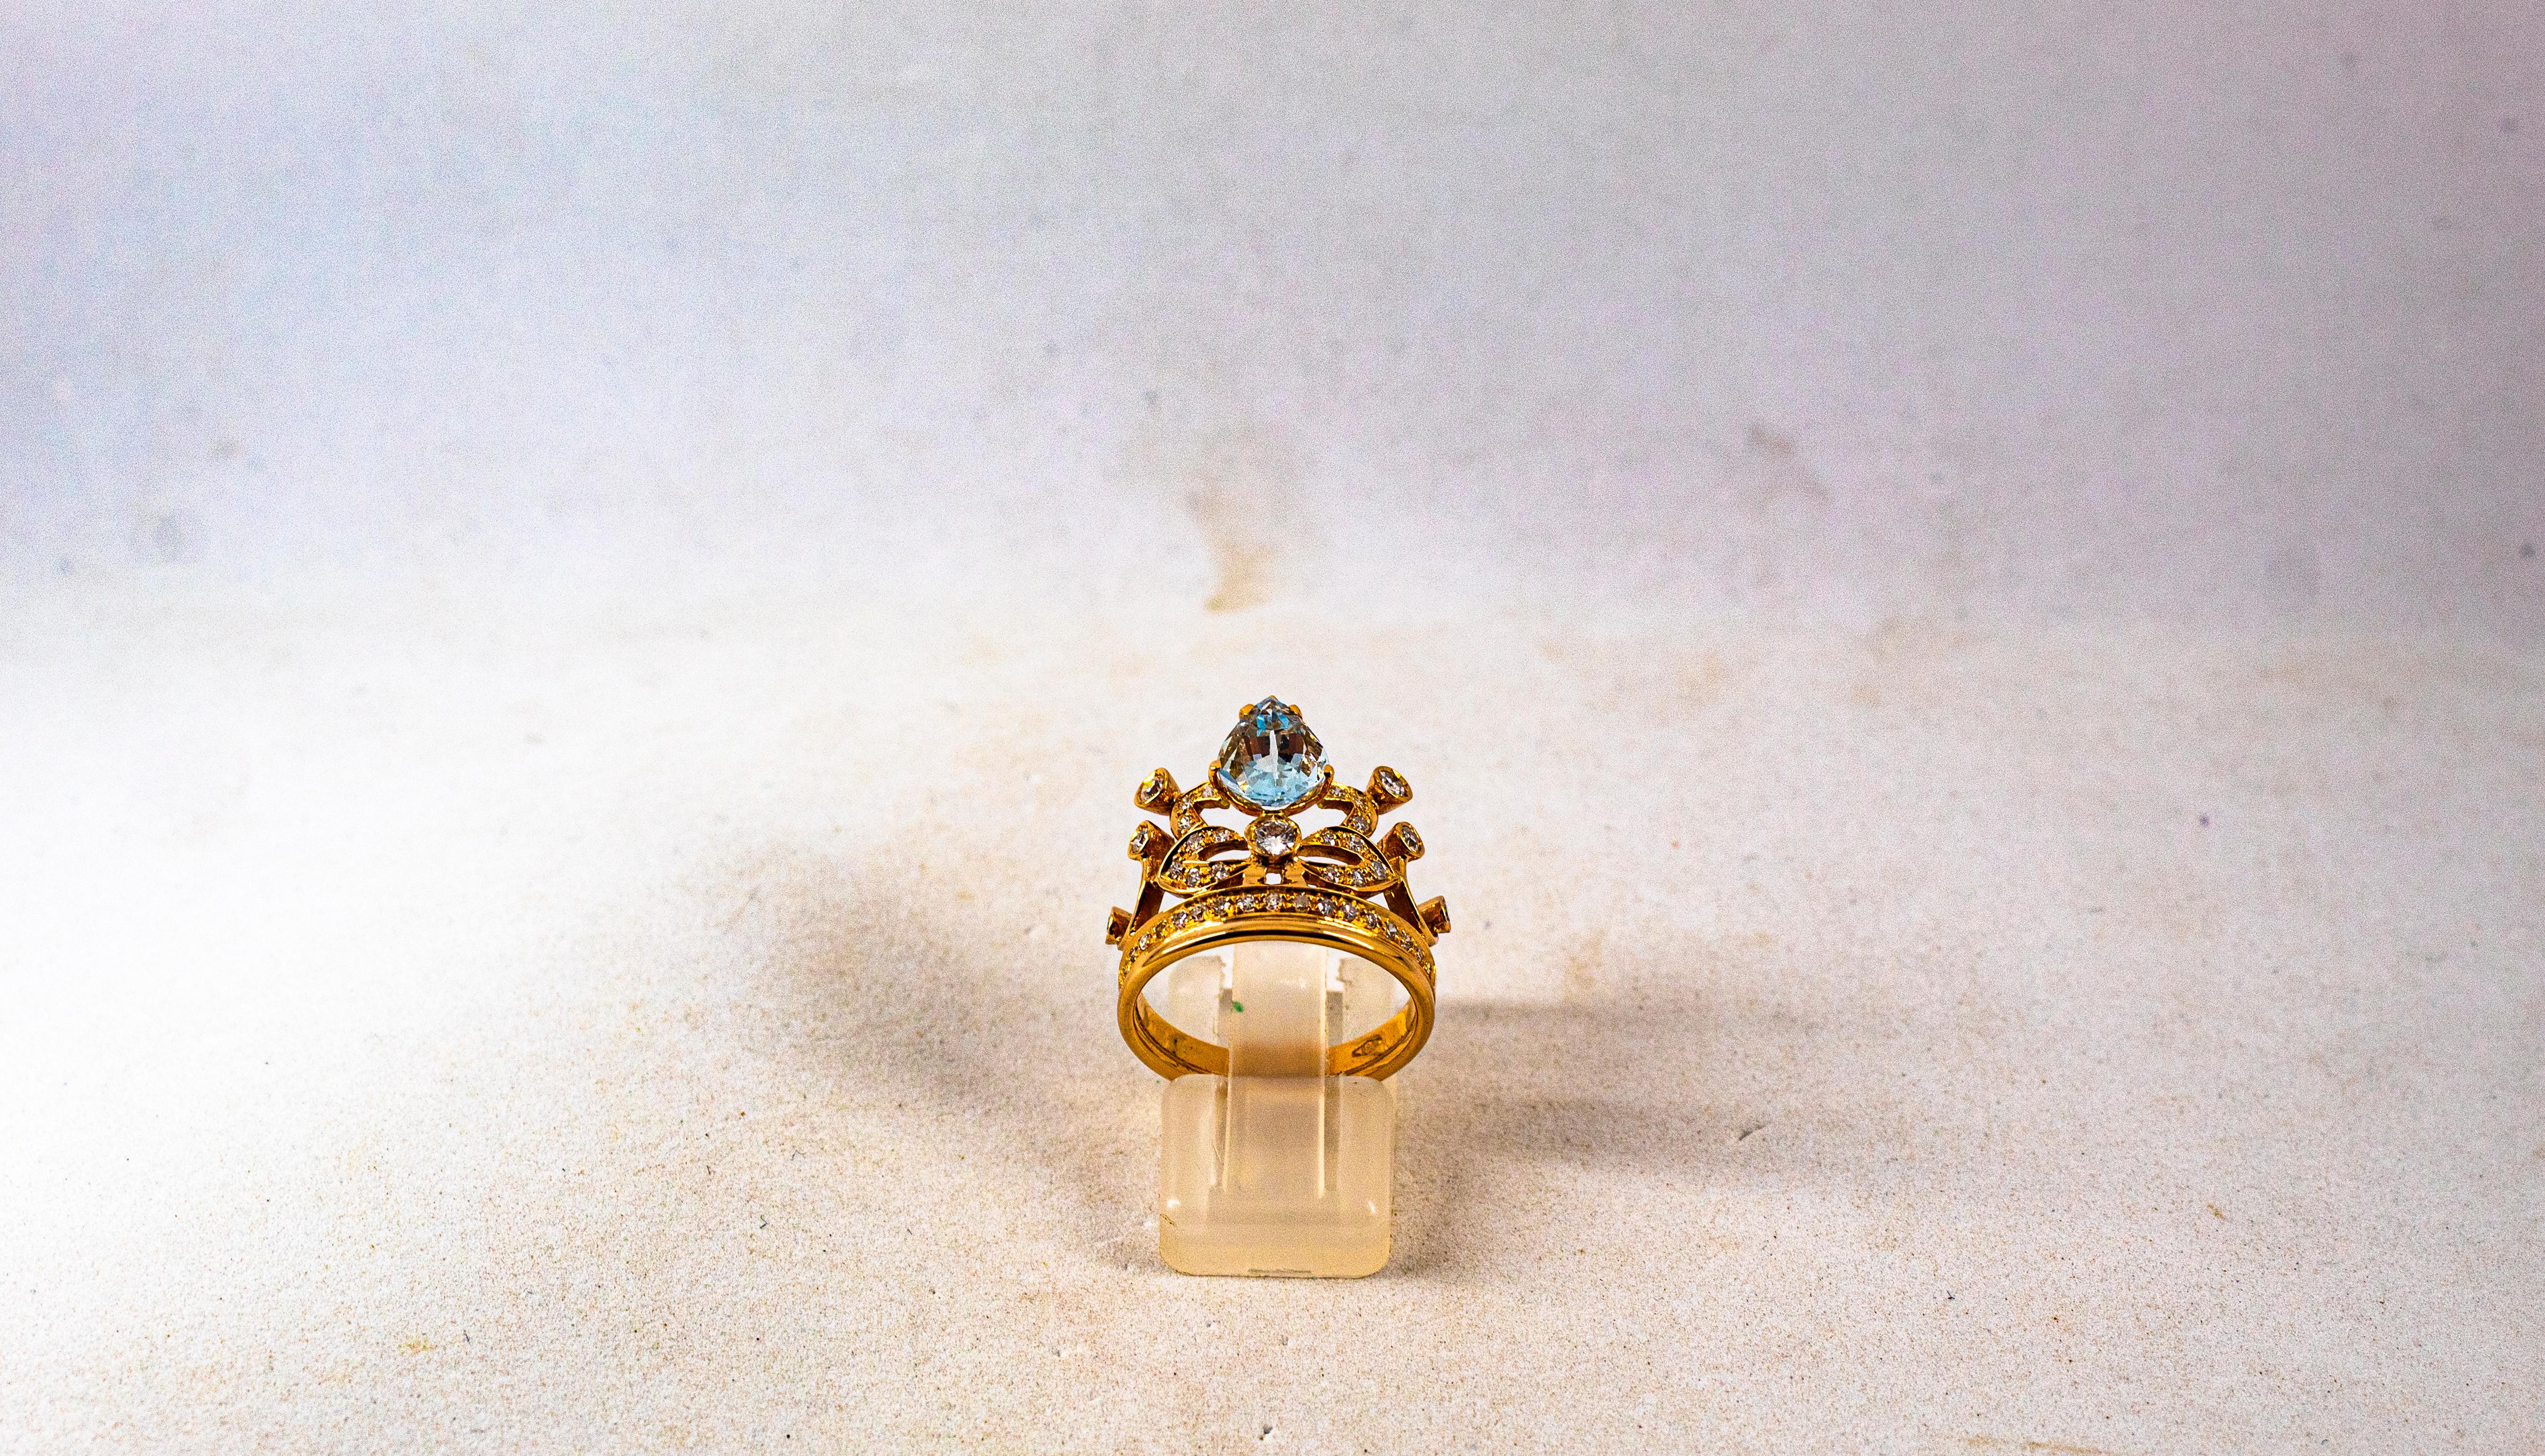 This Ring is made of 14K Rose Gold.
This Ring has 0.45 Carats of White Brilliant Cut Diamonds.
This Ring has a 1.40 Carats Pear Cut Aquamarine.

Size ITA: 15 USA: 7 1/4

We're a workshop so every piece is handmade, customizable and resizable.